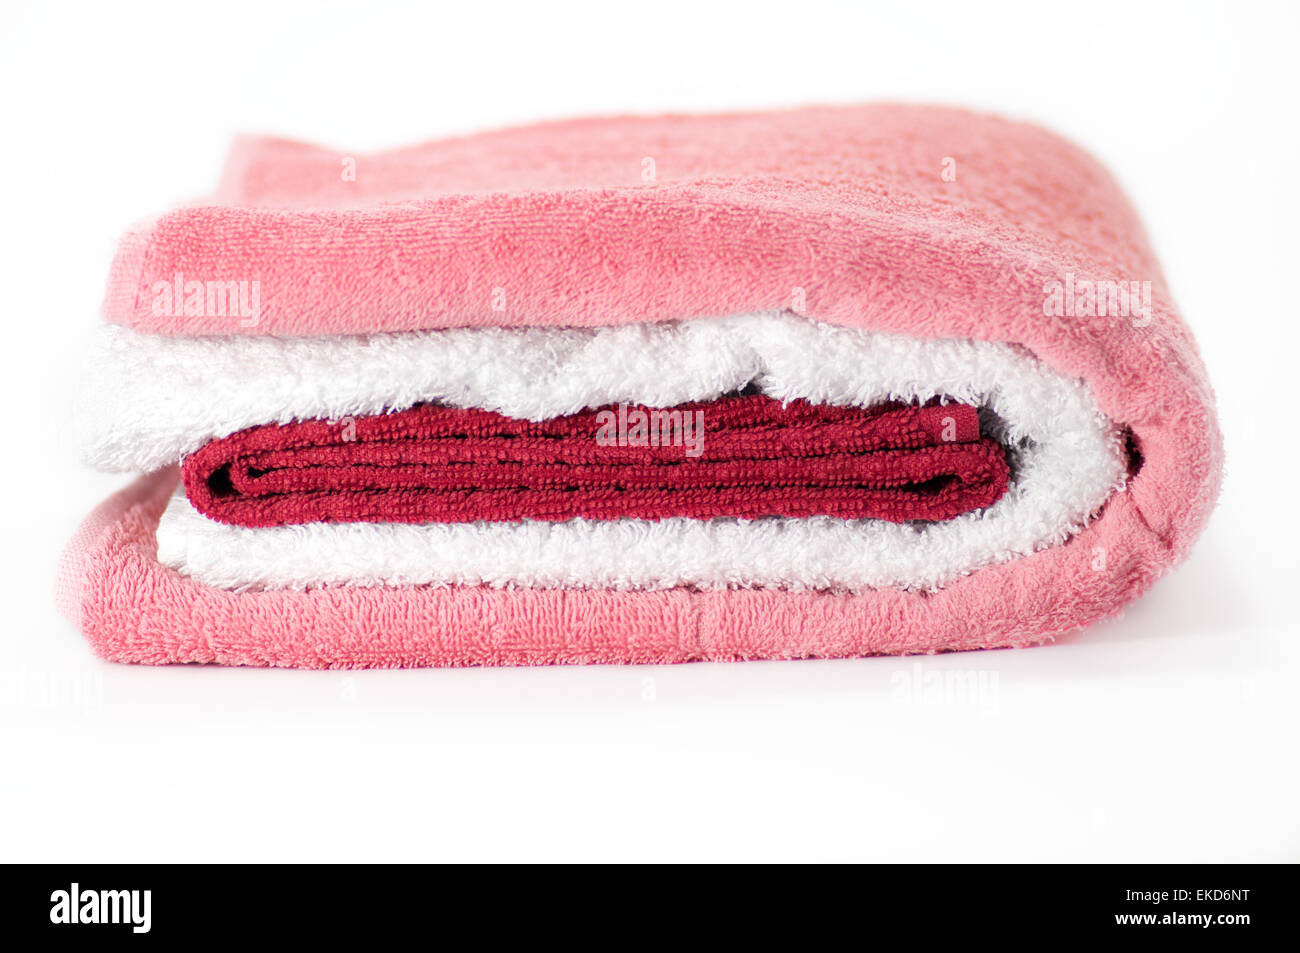 White, red and pink Terry towels Stock Photo